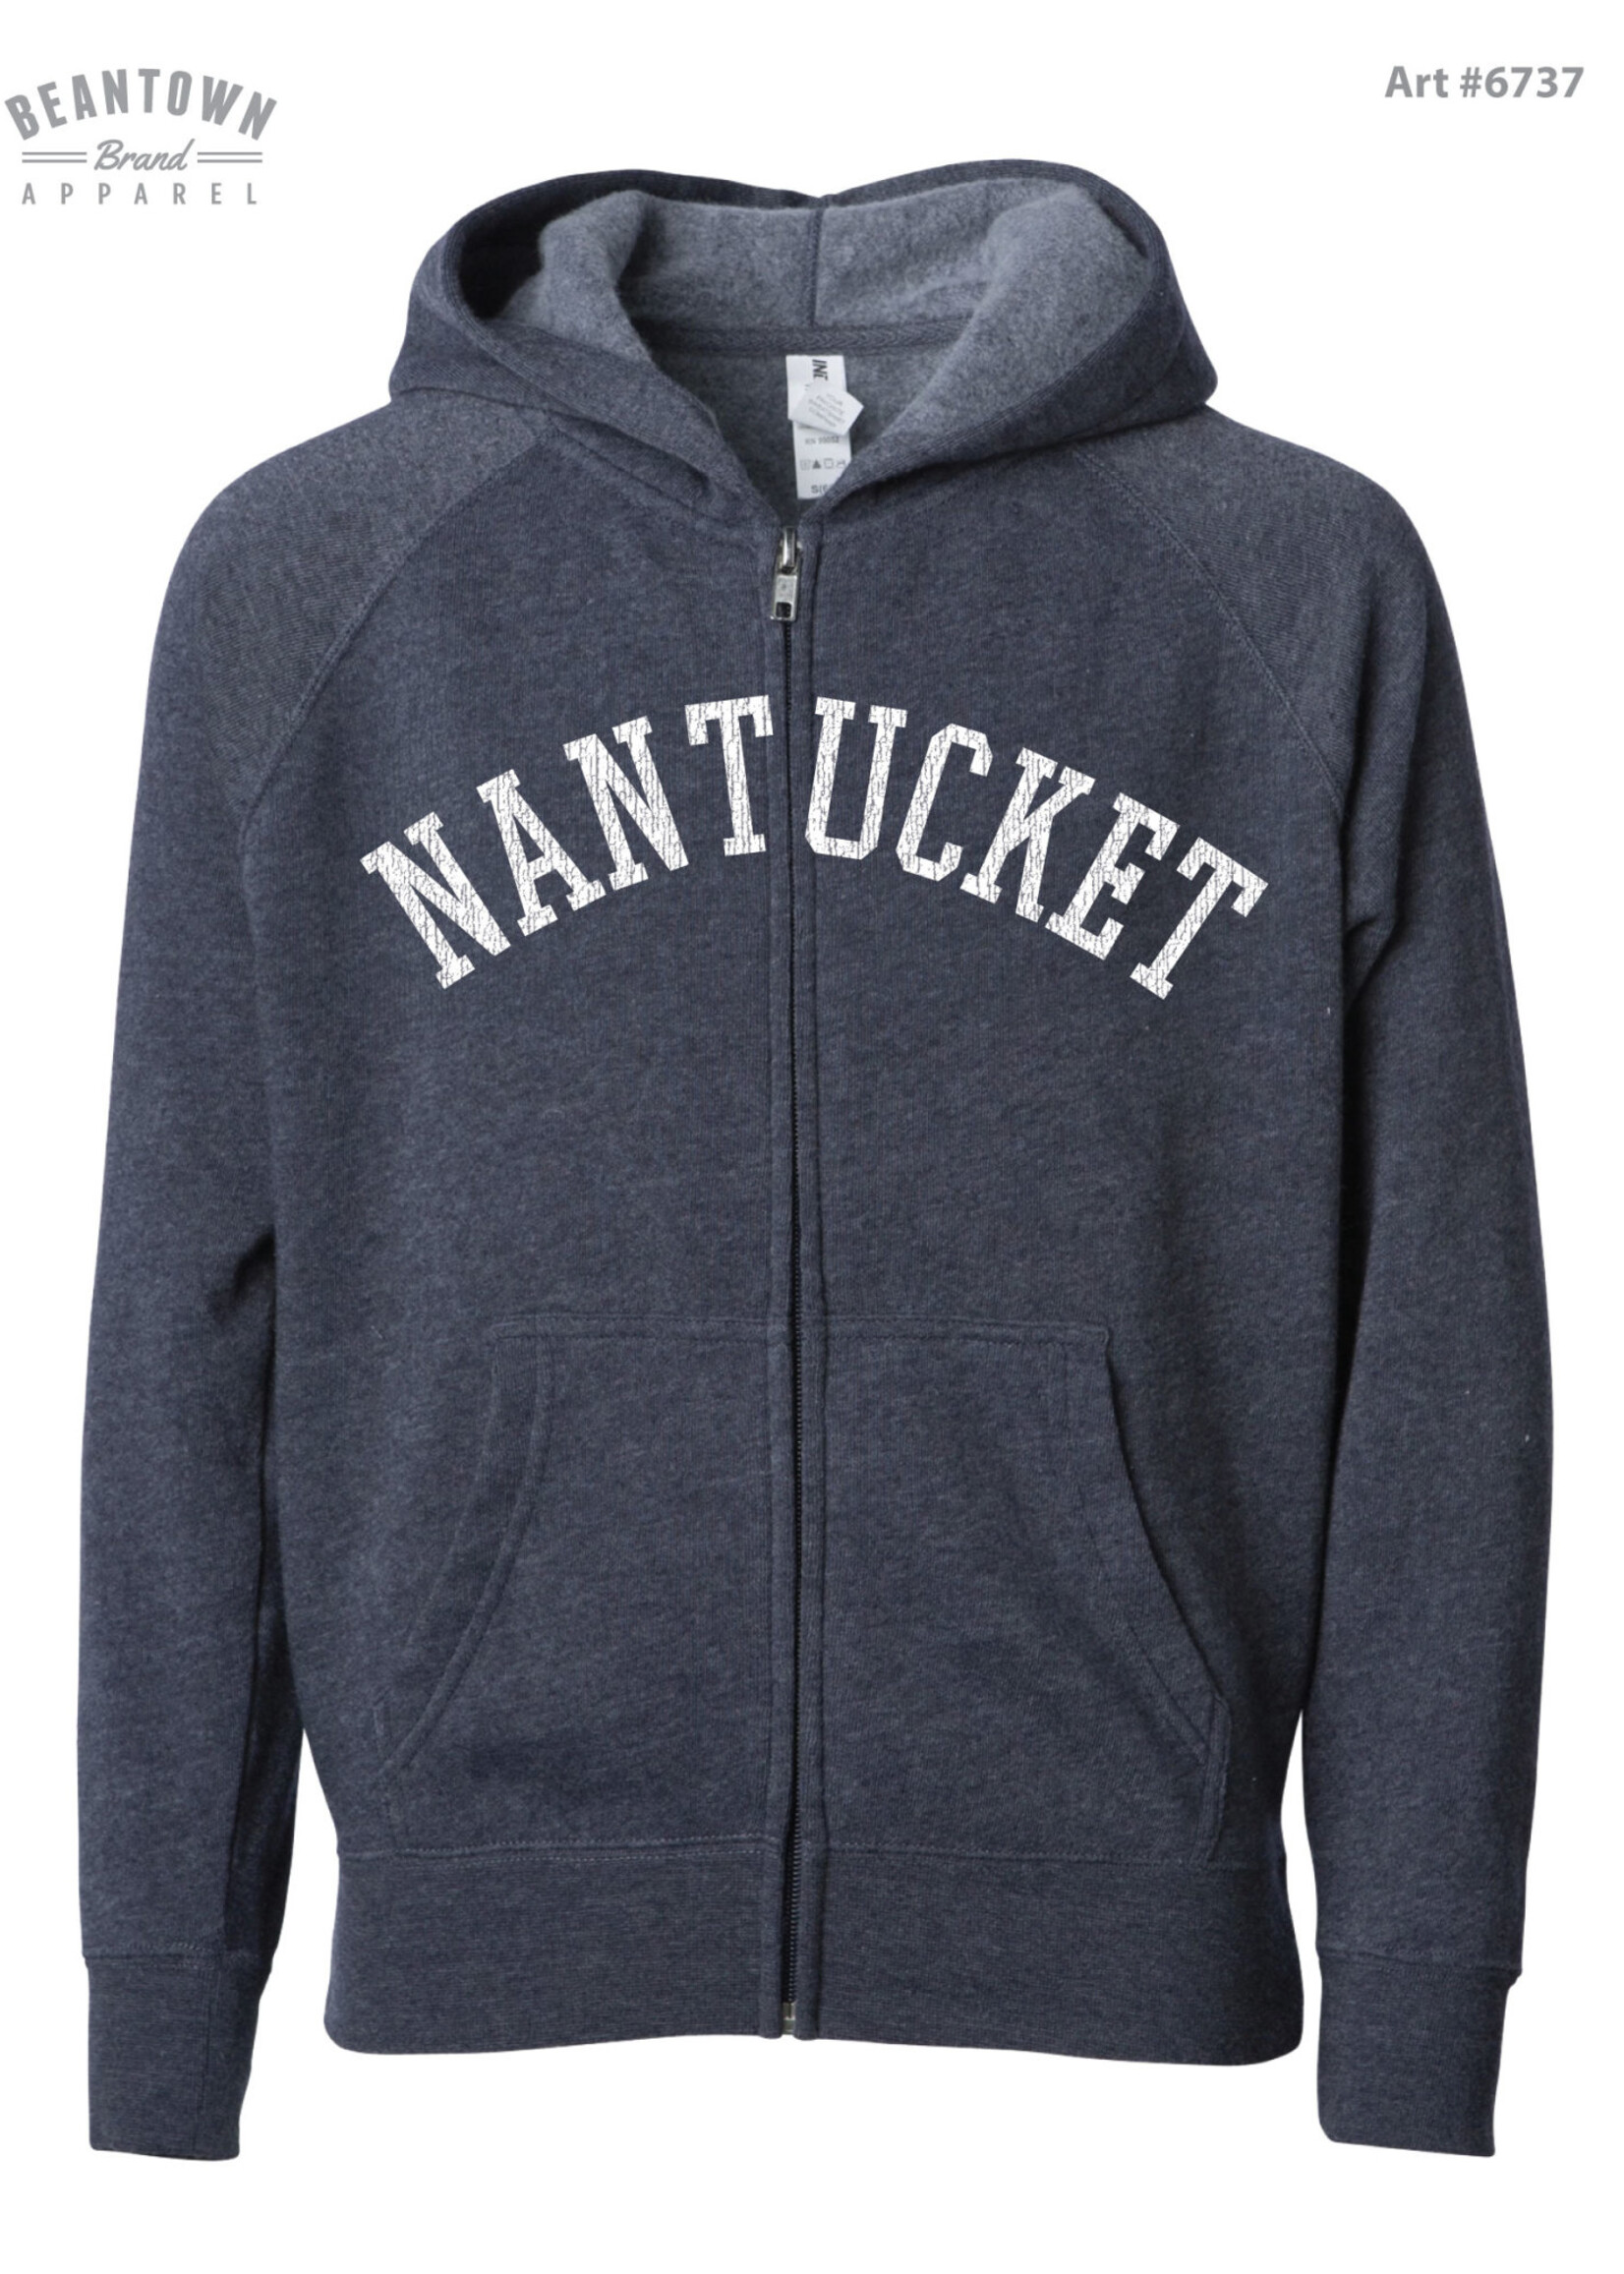 Beantown Independent Youth Full Zip Hoodie